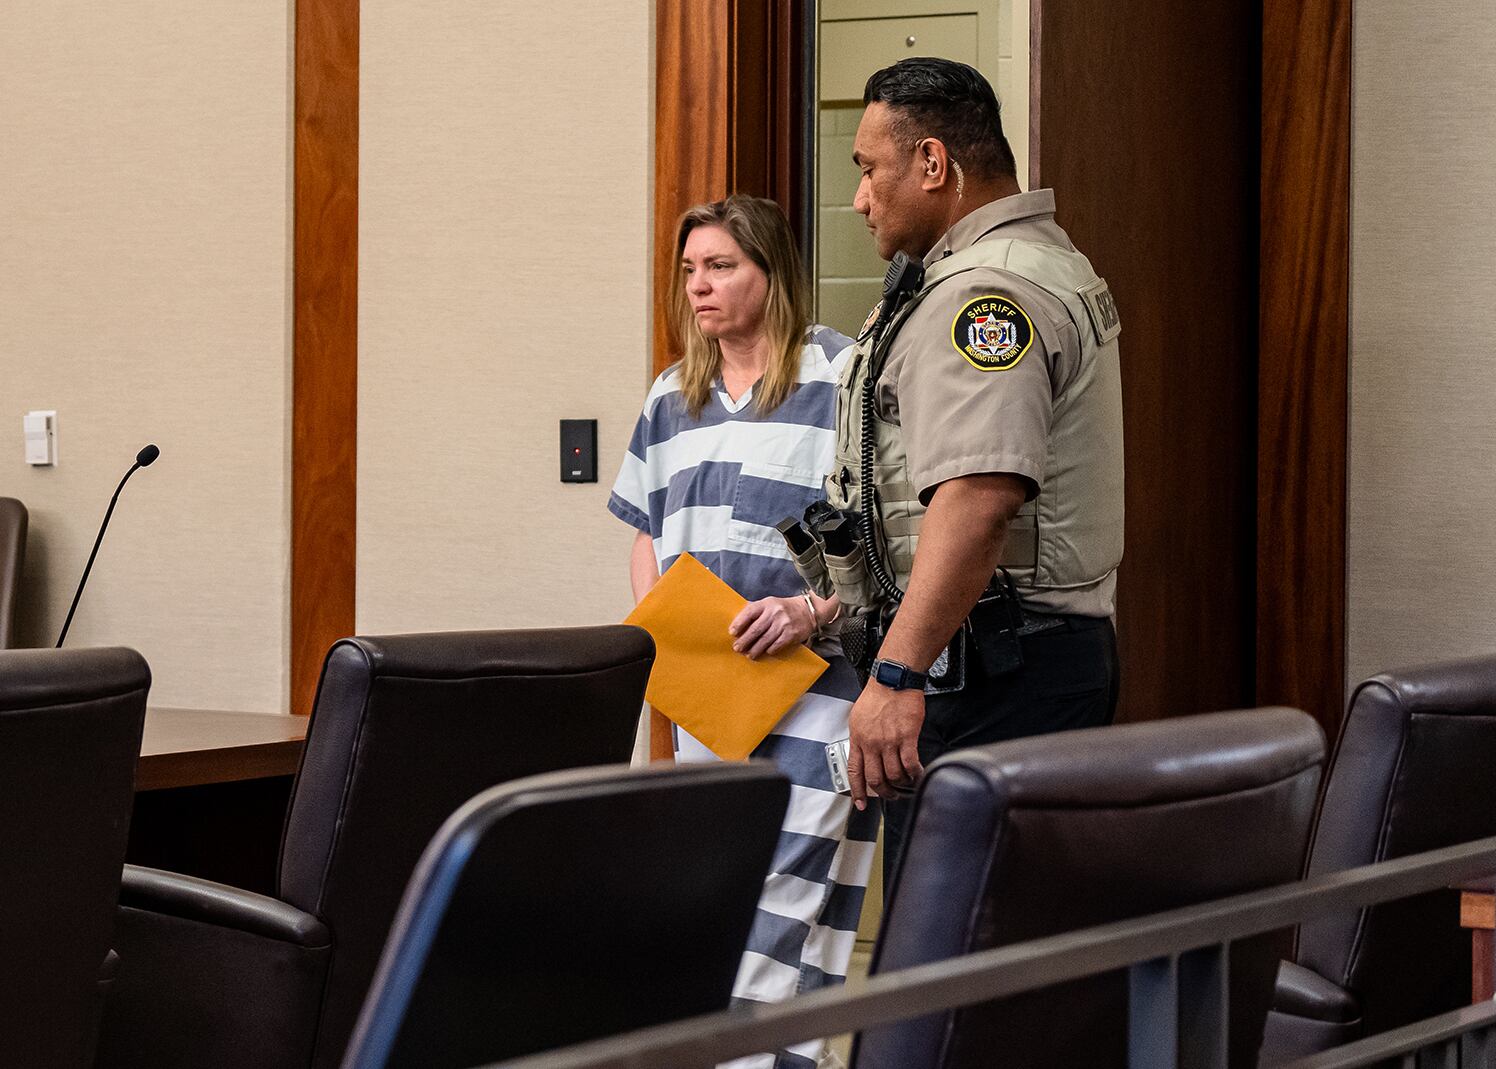 (Sheldon Demke | Pool) Therapist-turned-life-coach Jodi Hildebrandt appears in court earlier this year for a sentencing hearing after she was convicted of abusing two children.